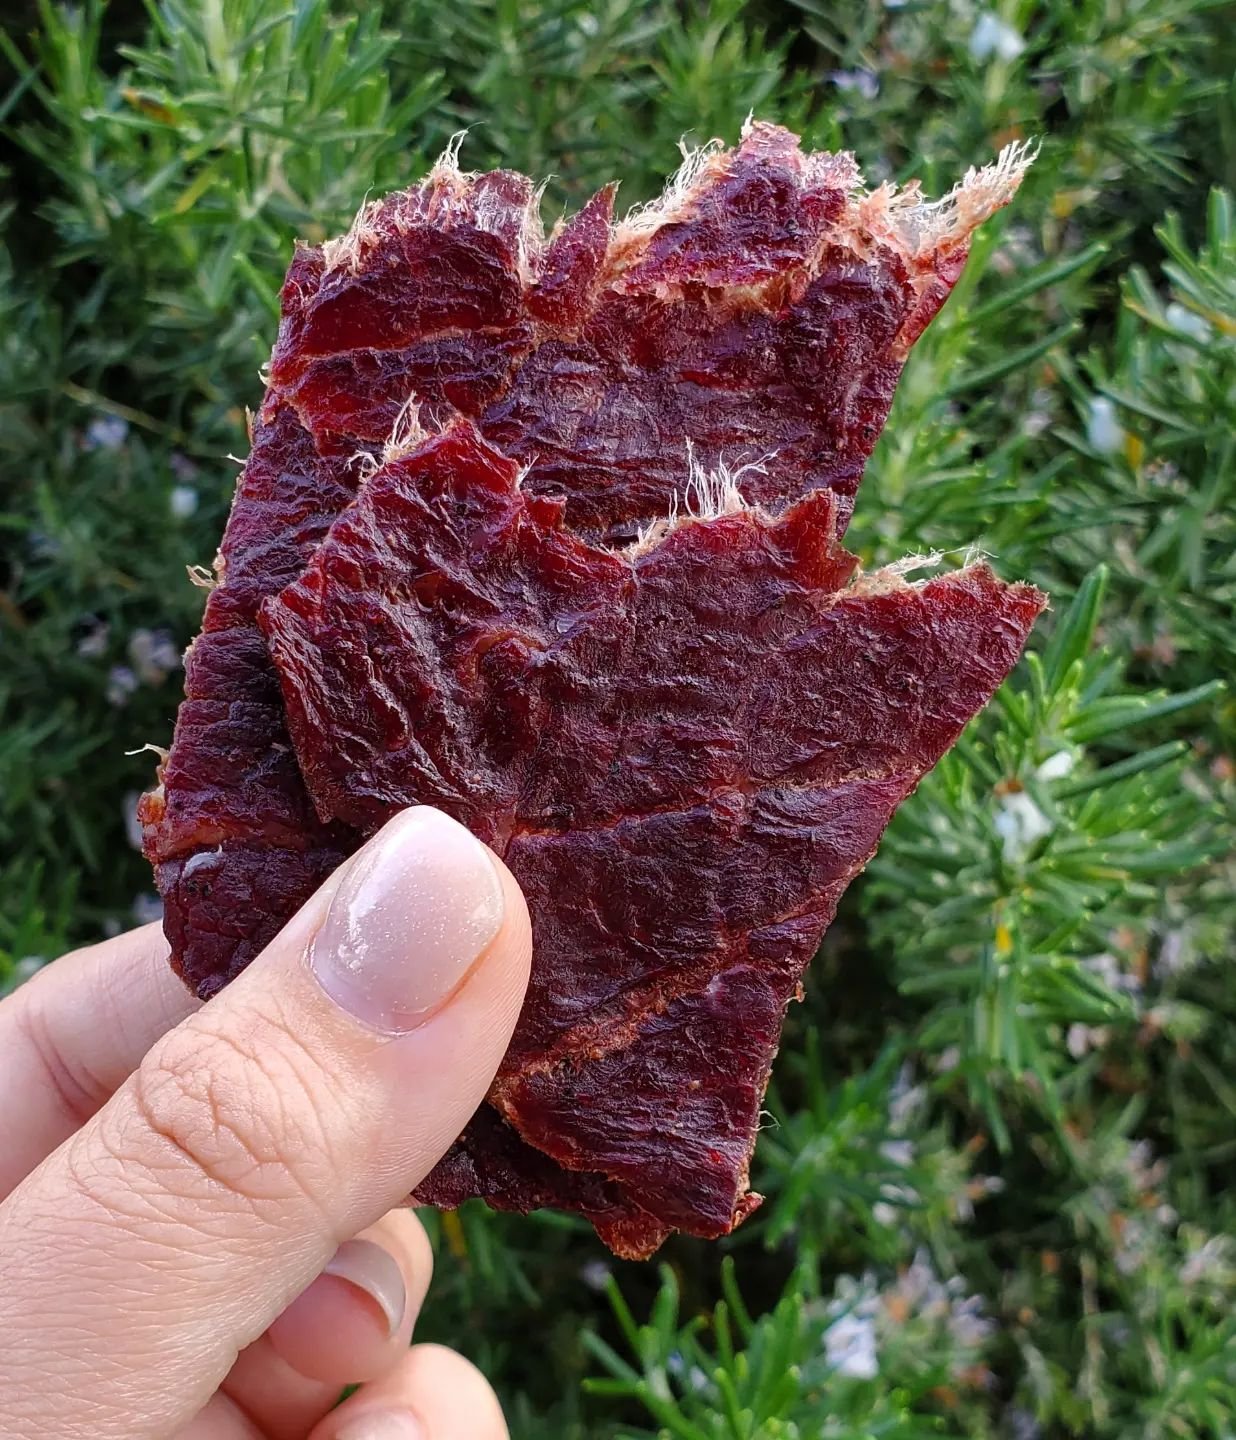 Our signature grass-fed beef jerky is back in stock in all 3 delicious flavours - original, peppercorn, and teriyaki!
 
Have you tried our jerky yet? If so, what's your go-to flavour?? Let us know in the comments below 👇